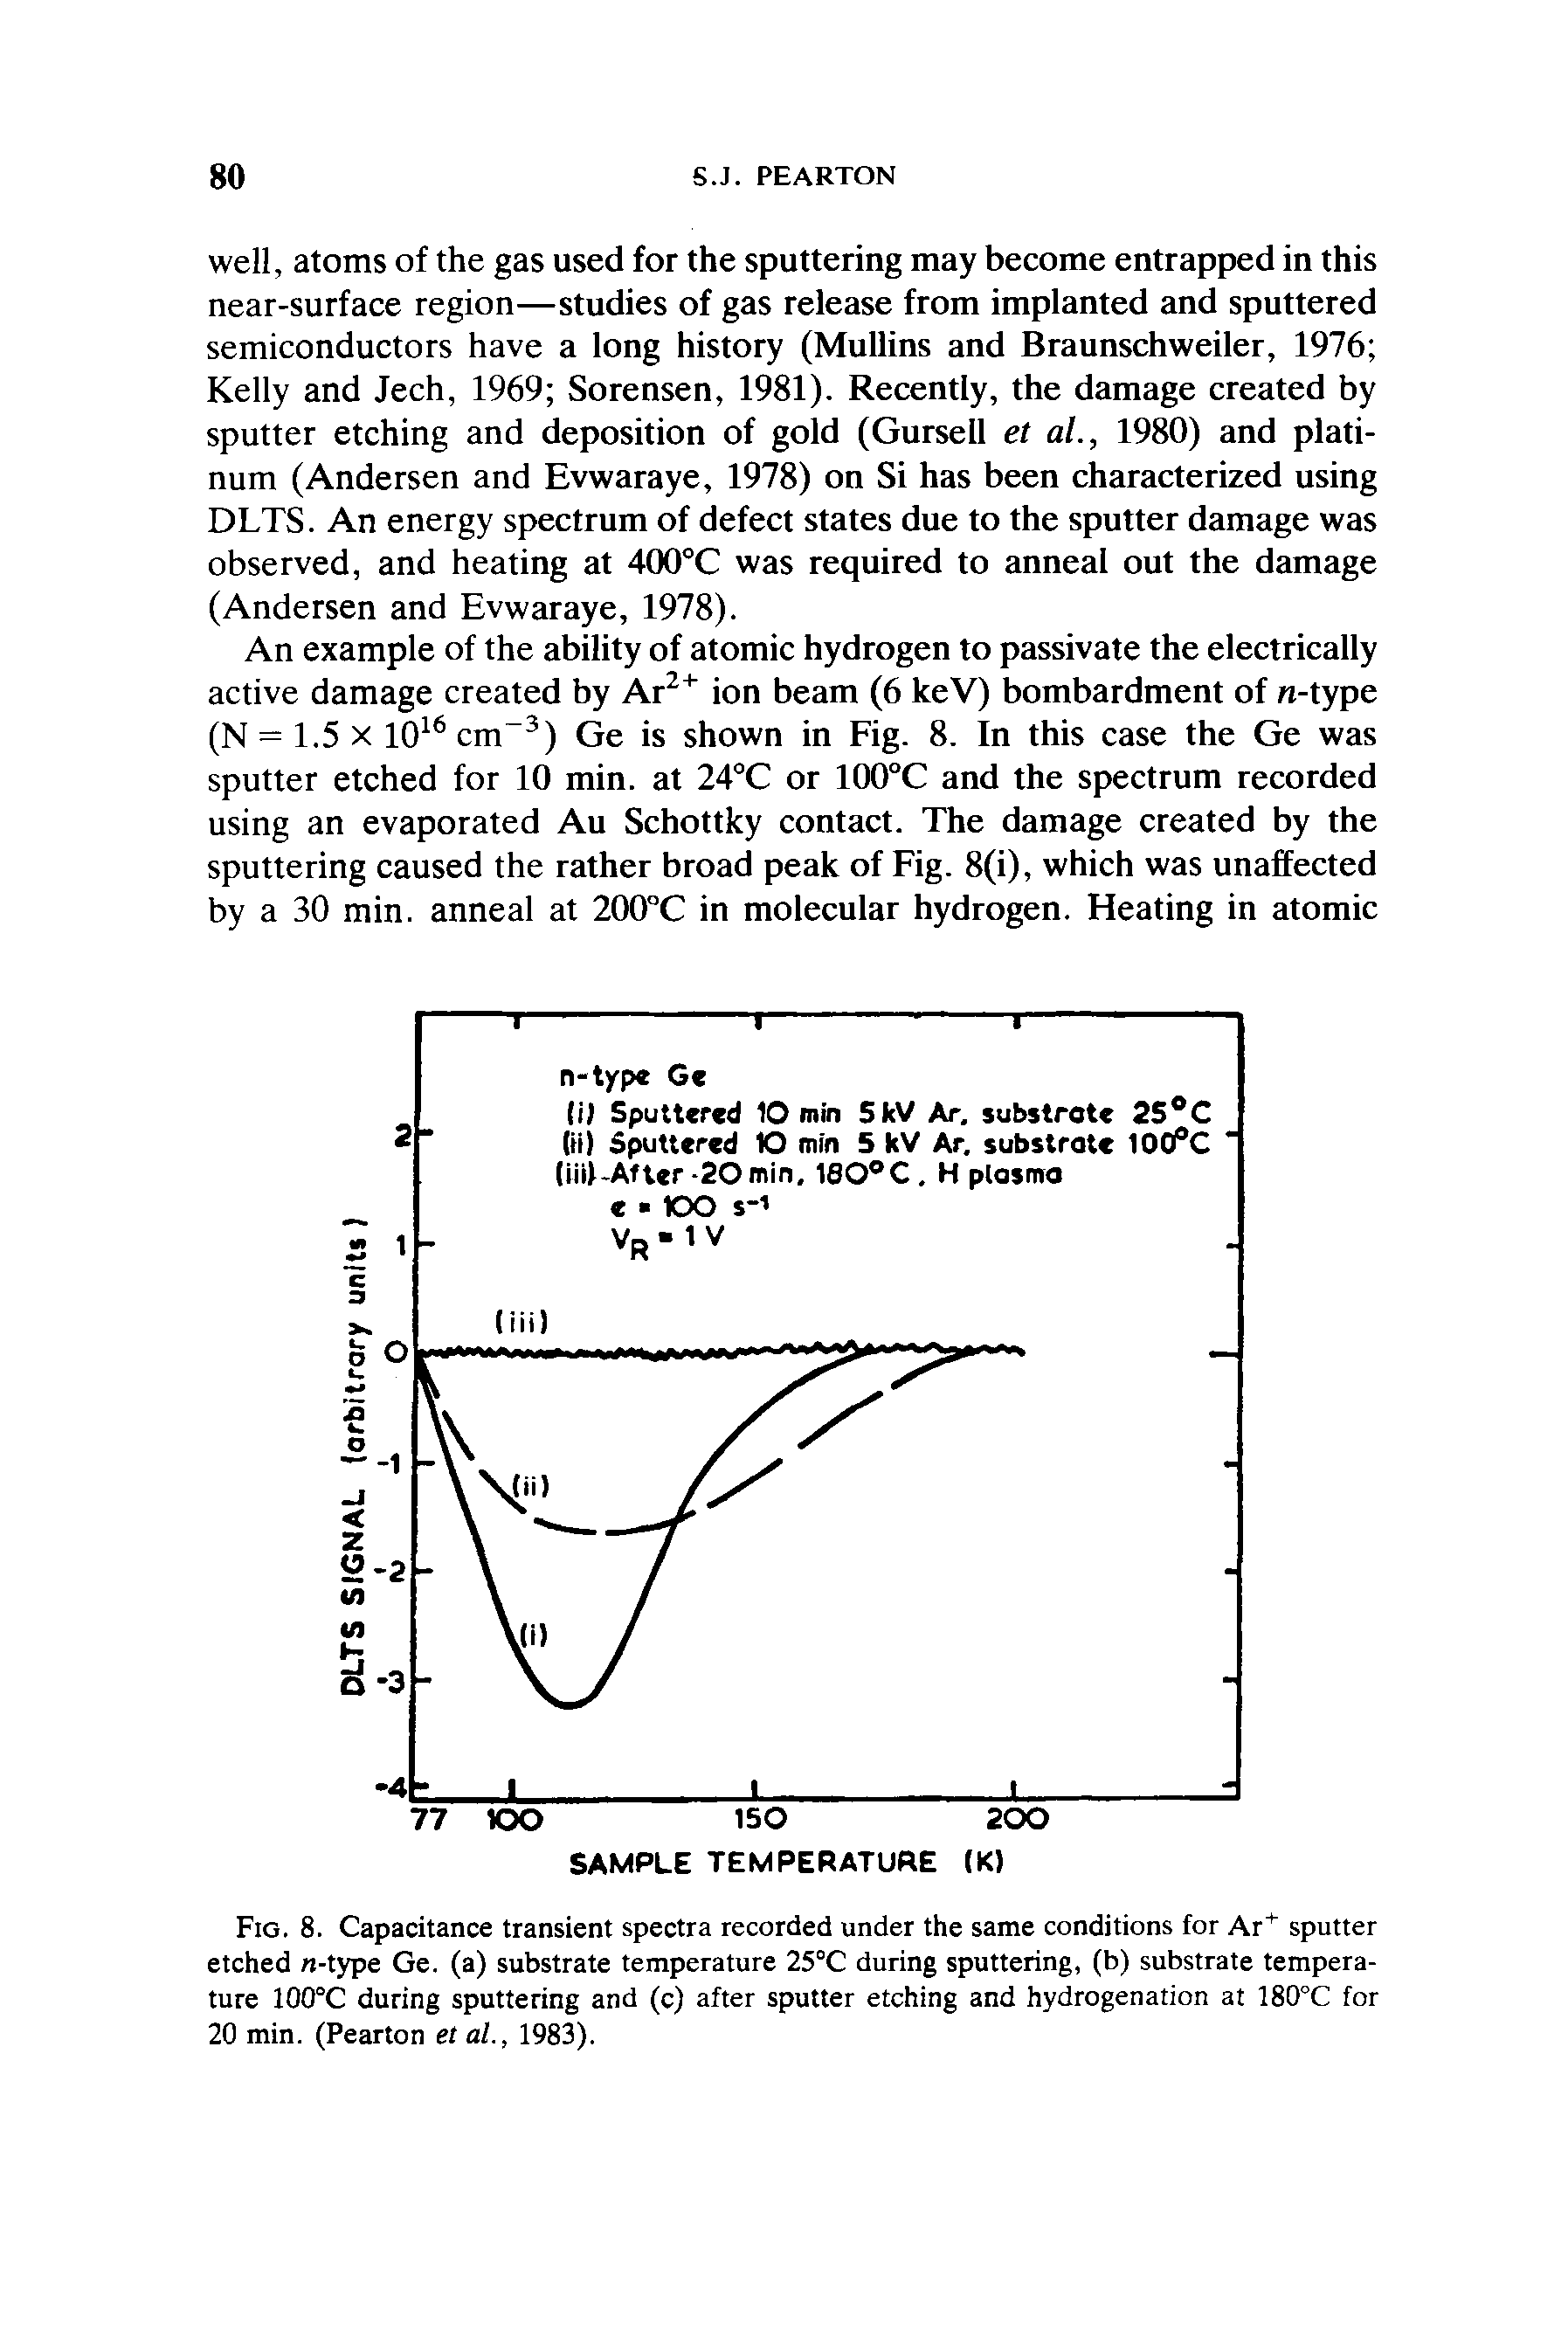 Fig. 8. Capacitance transient spectra recorded under the same conditions for Ar+ sputter etched n-type Ge. (a) substrate temperature 25°C during sputtering, (b) substrate temperature 100°C during sputtering and (c) after sputter etching and hydrogenation at 180 C for 20 min. (Pearton et al., 1983).